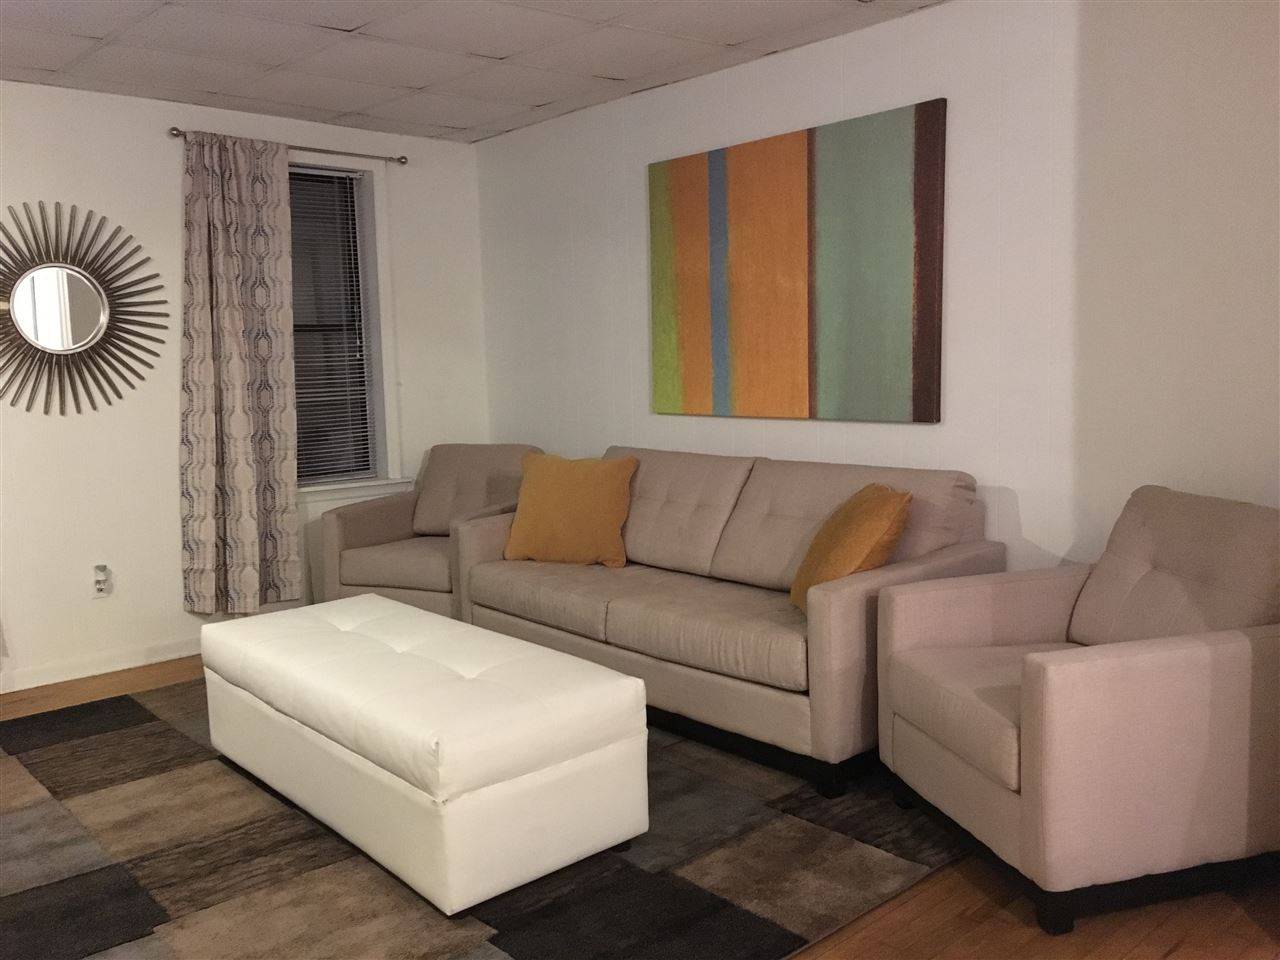 Available ASAP - 2 BR Historic Downtown New Jersey